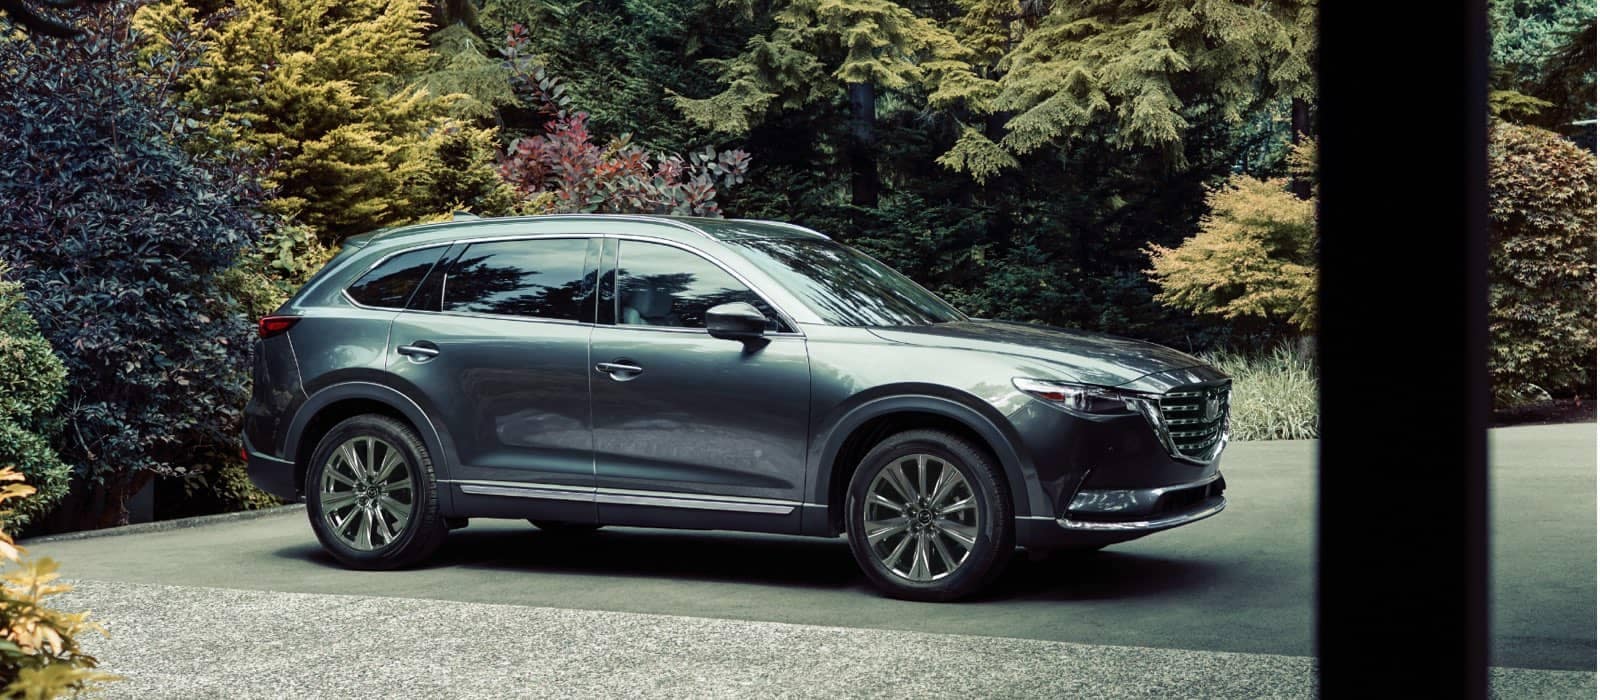 2021 Mazda CX-5 parked sideview